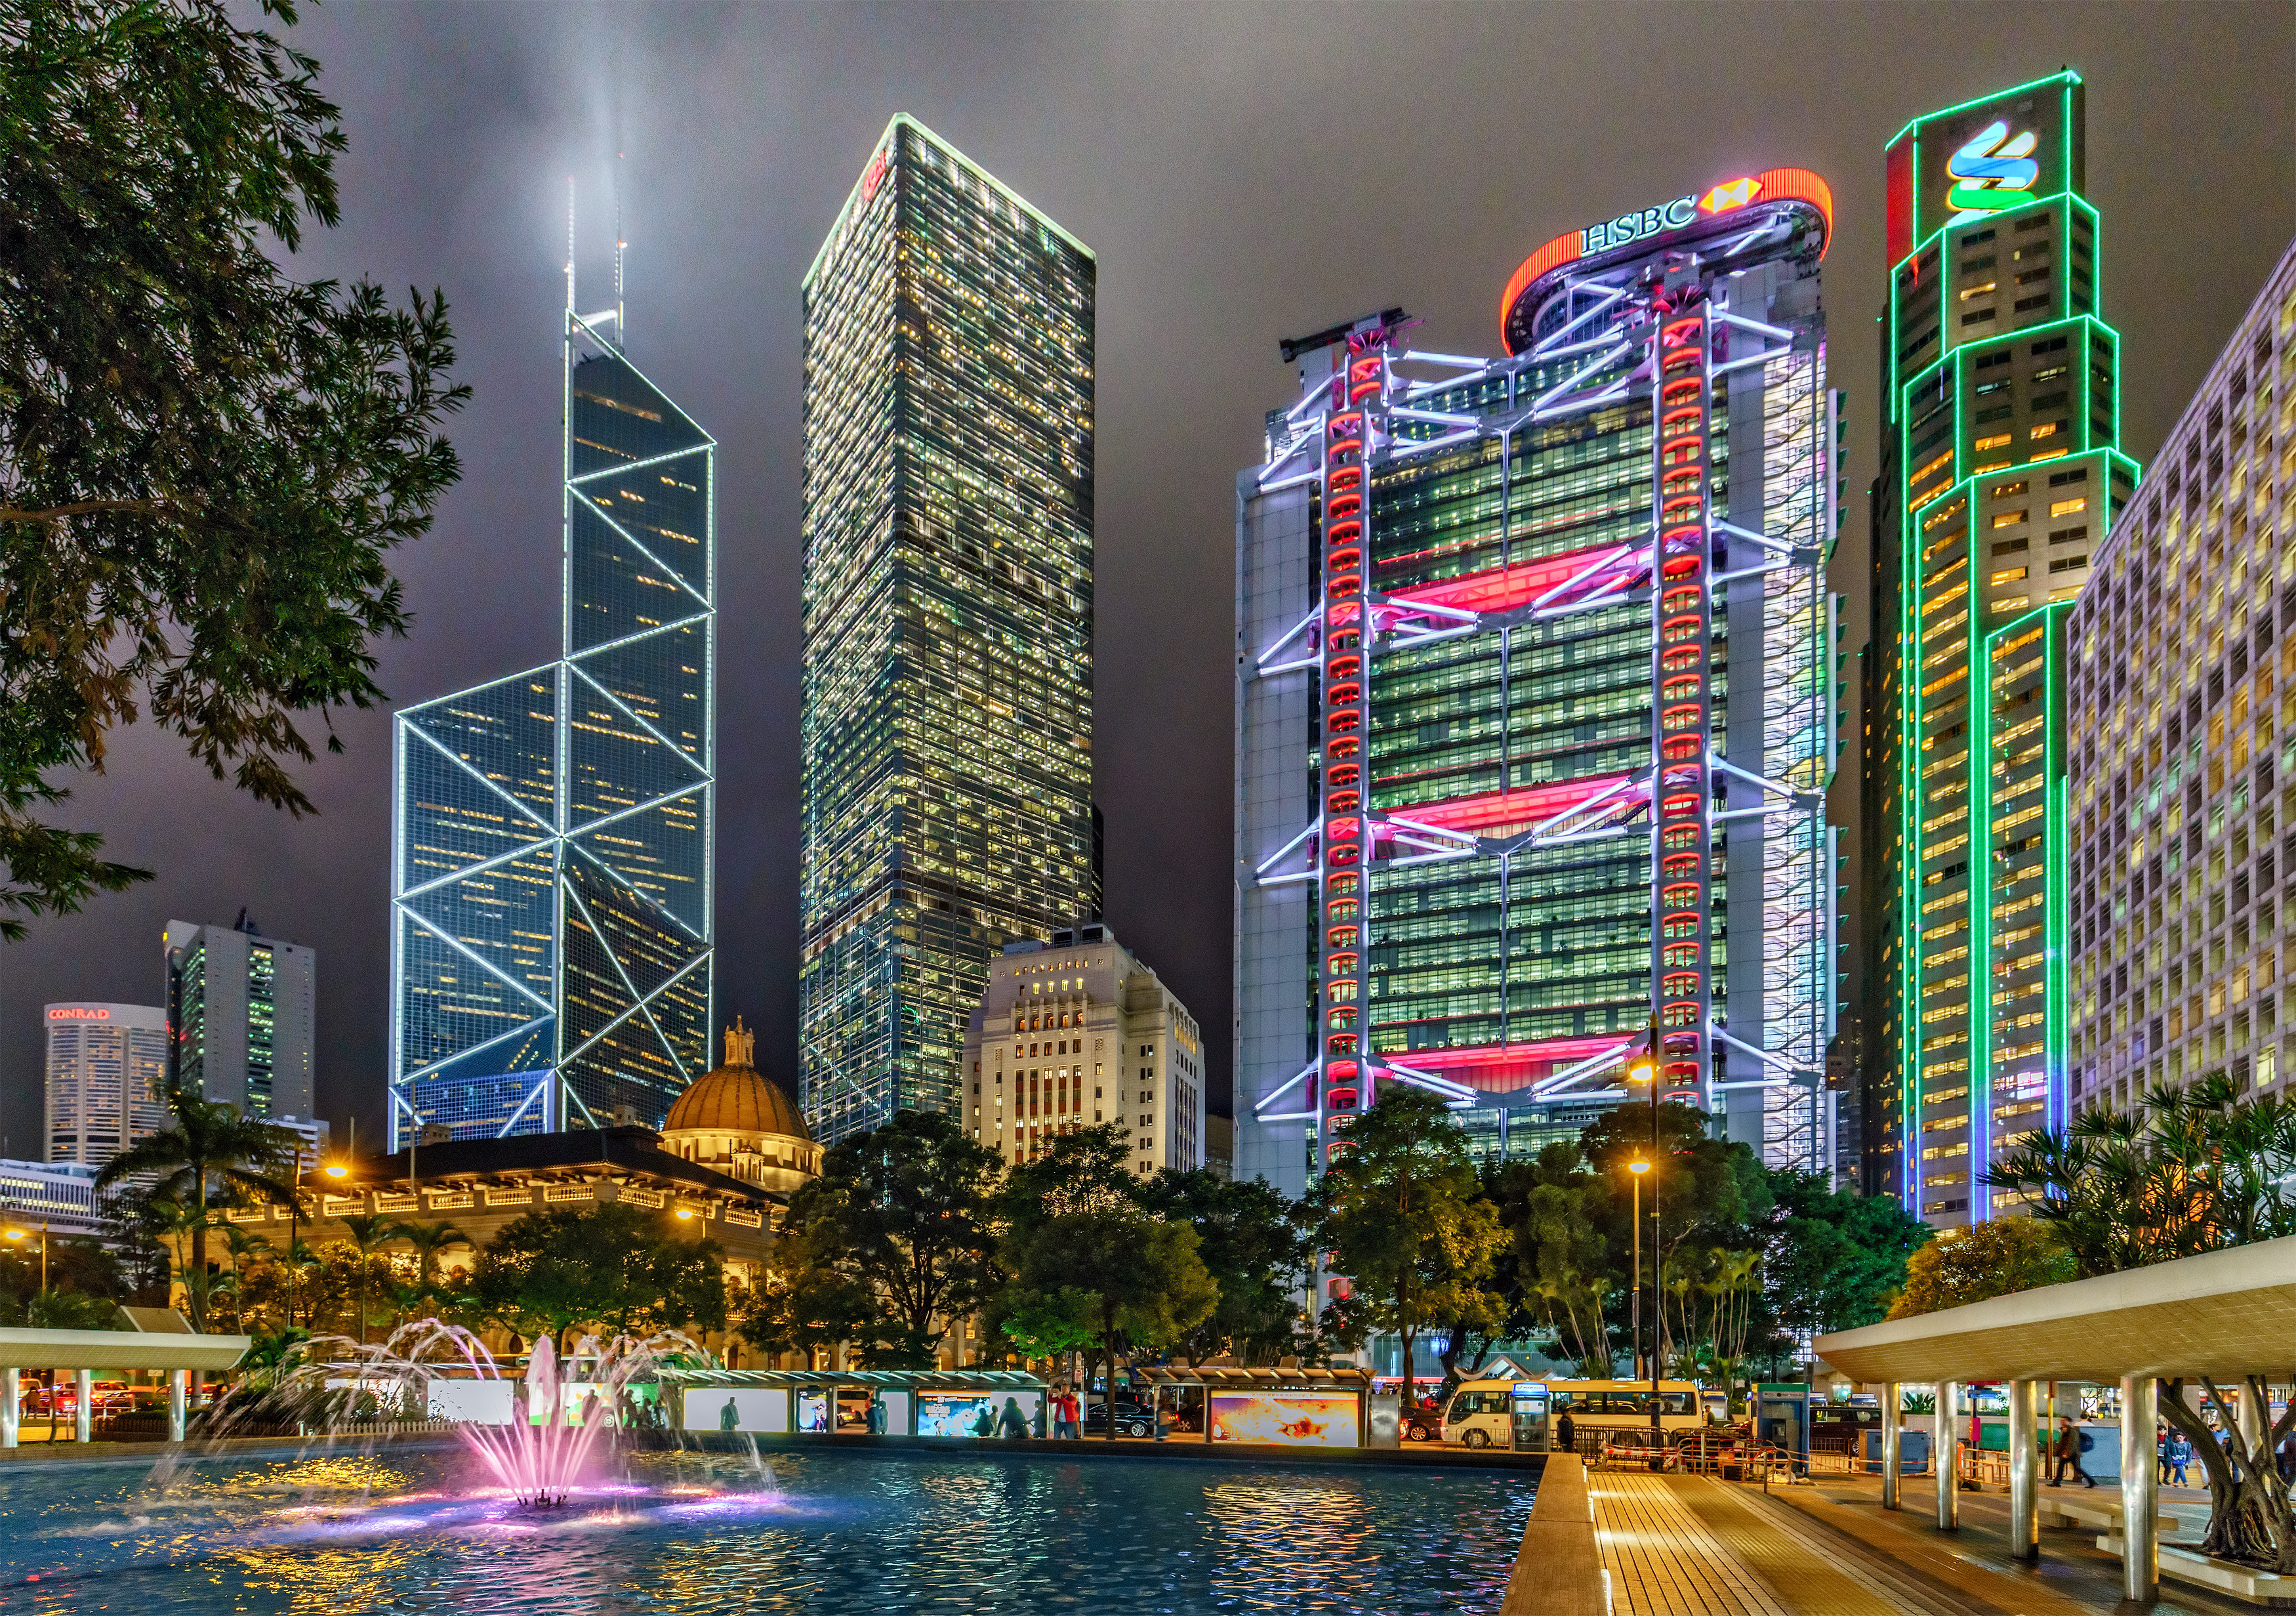 Night cityscape of Hong Kong’s Central District with Bank of China Tower, Cheung Kong Centre, HSBC Main Building and Standard Chartered Bank. Photo: Shutterstock

